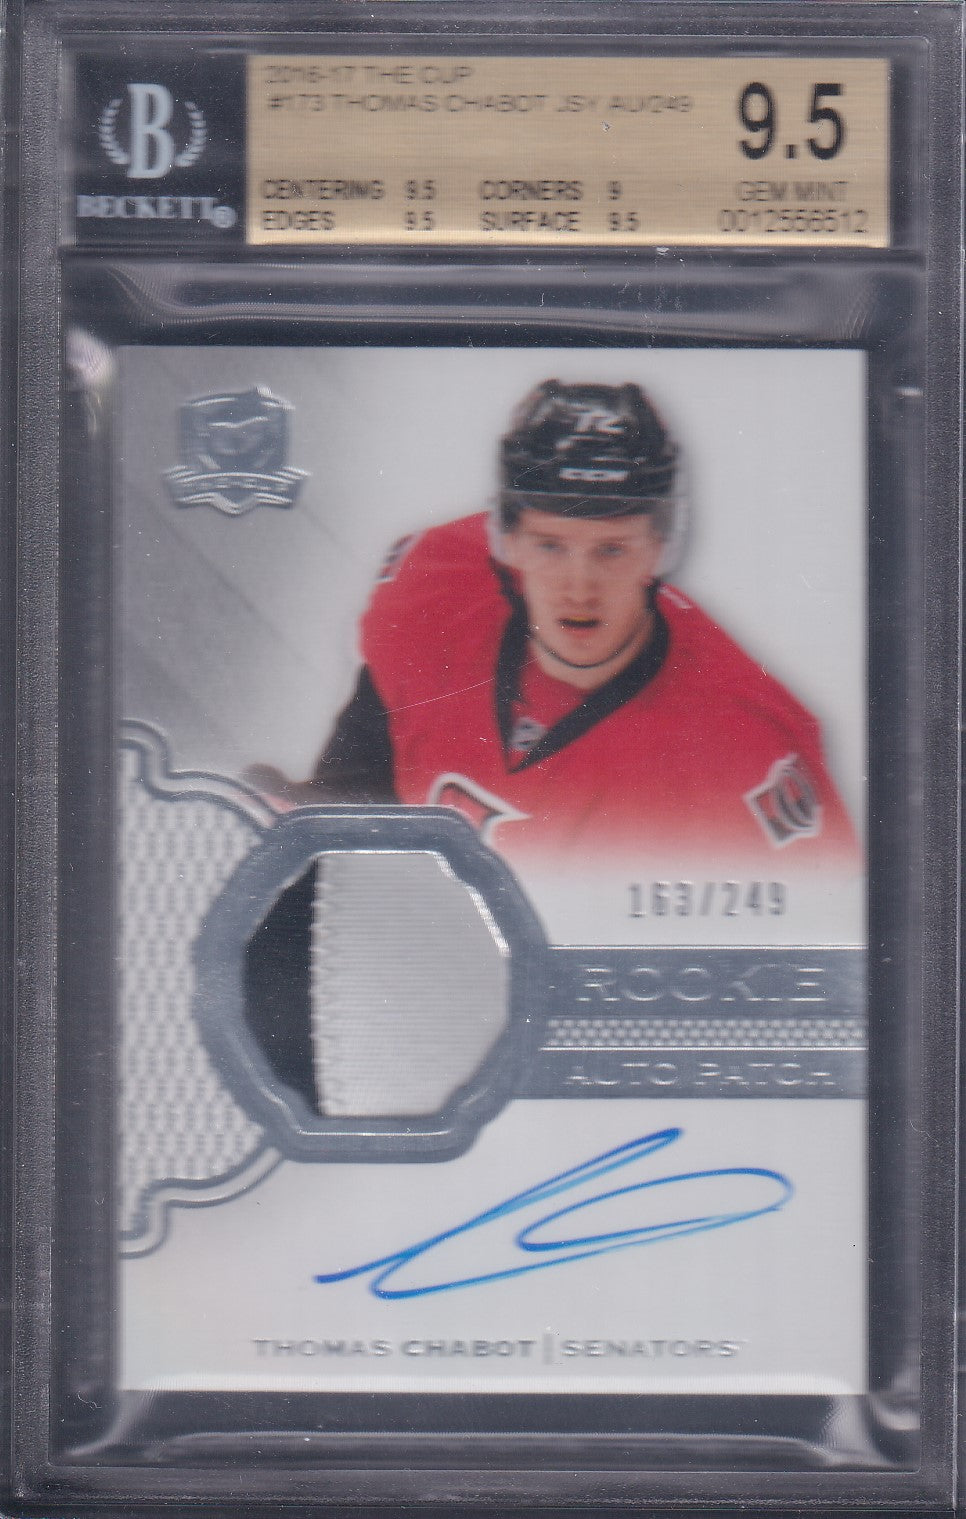 THOMAS CHABOT - 2016 The Cup Rookie Auto Patch #173, BGS 9.5, /249